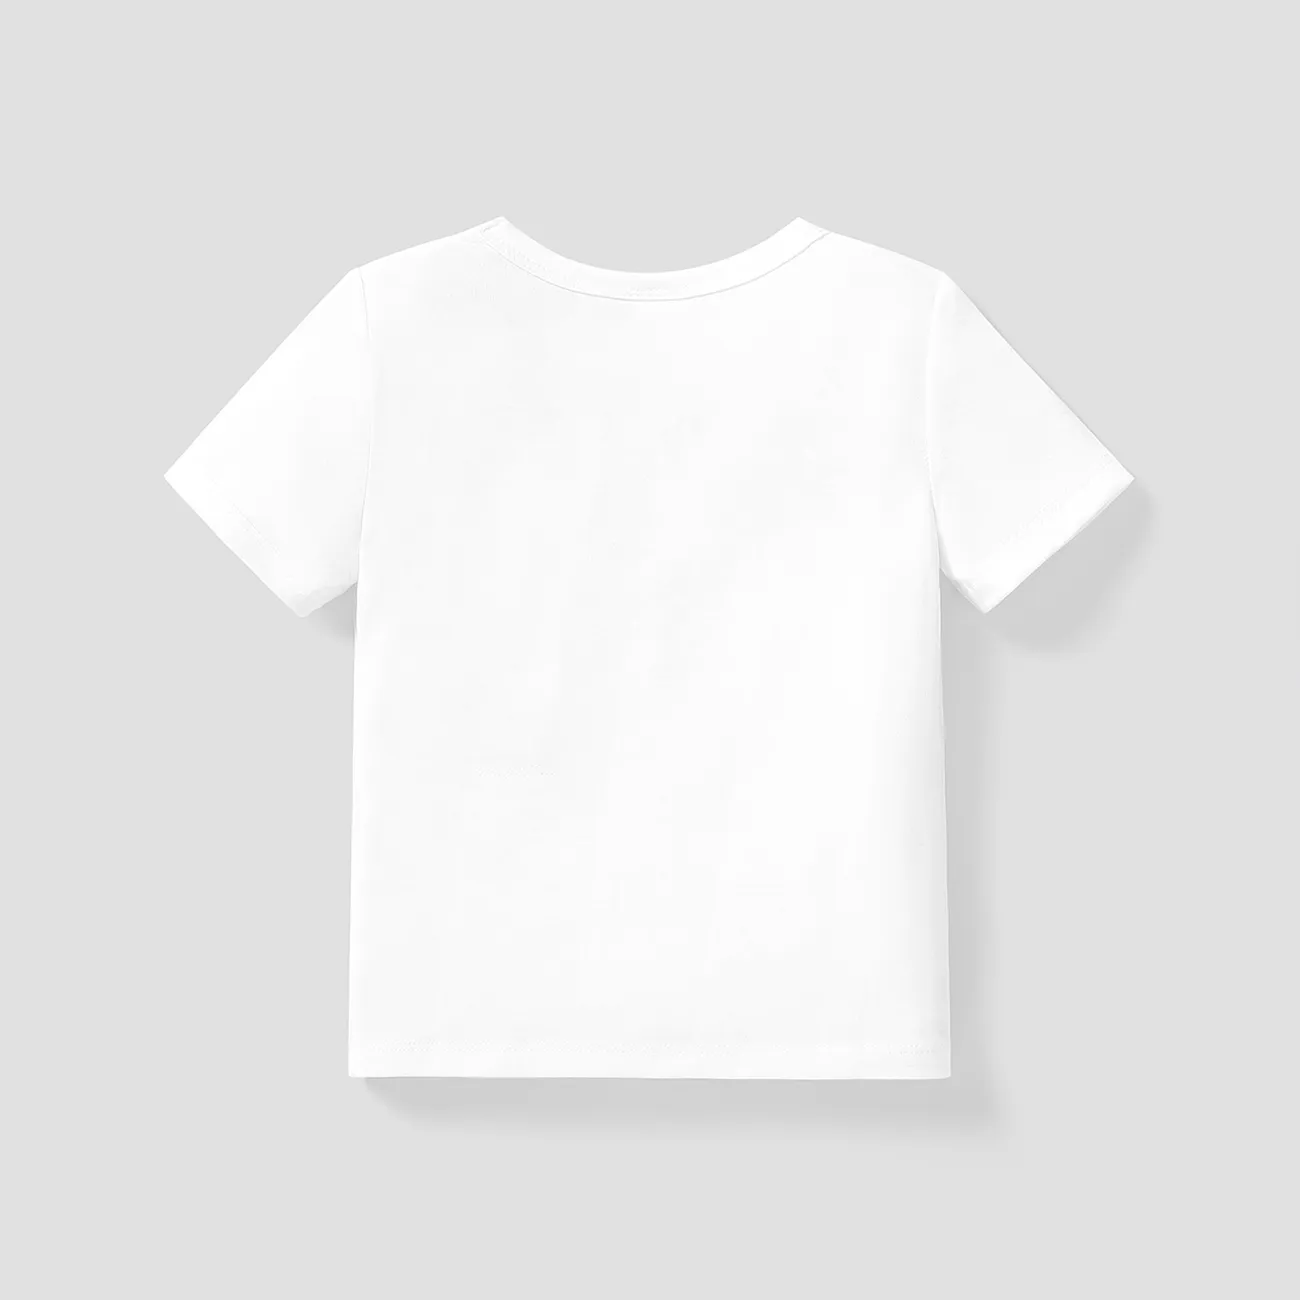 Toddler Boy Expressions Short Sleeve Casual Tee White big image 1